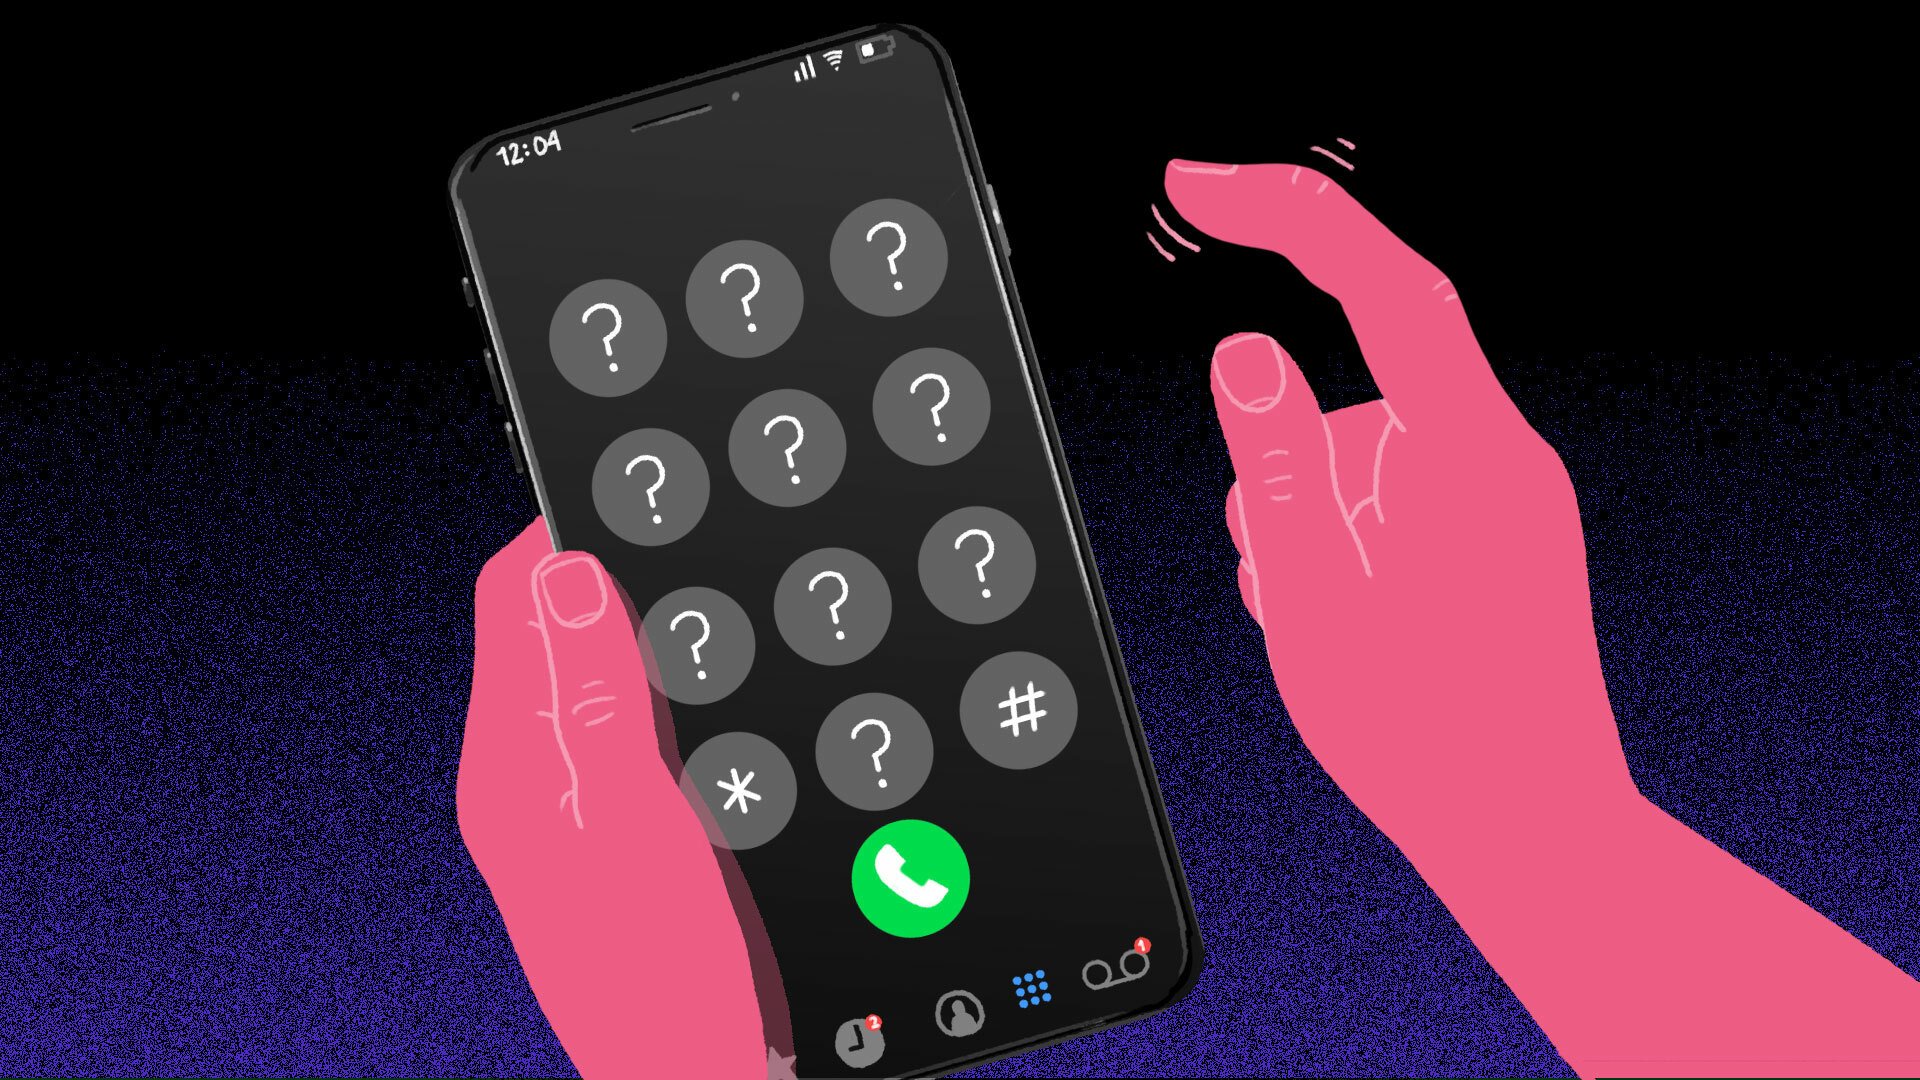 this photo shows a cellphone but the numbers to call are obscured by question marks